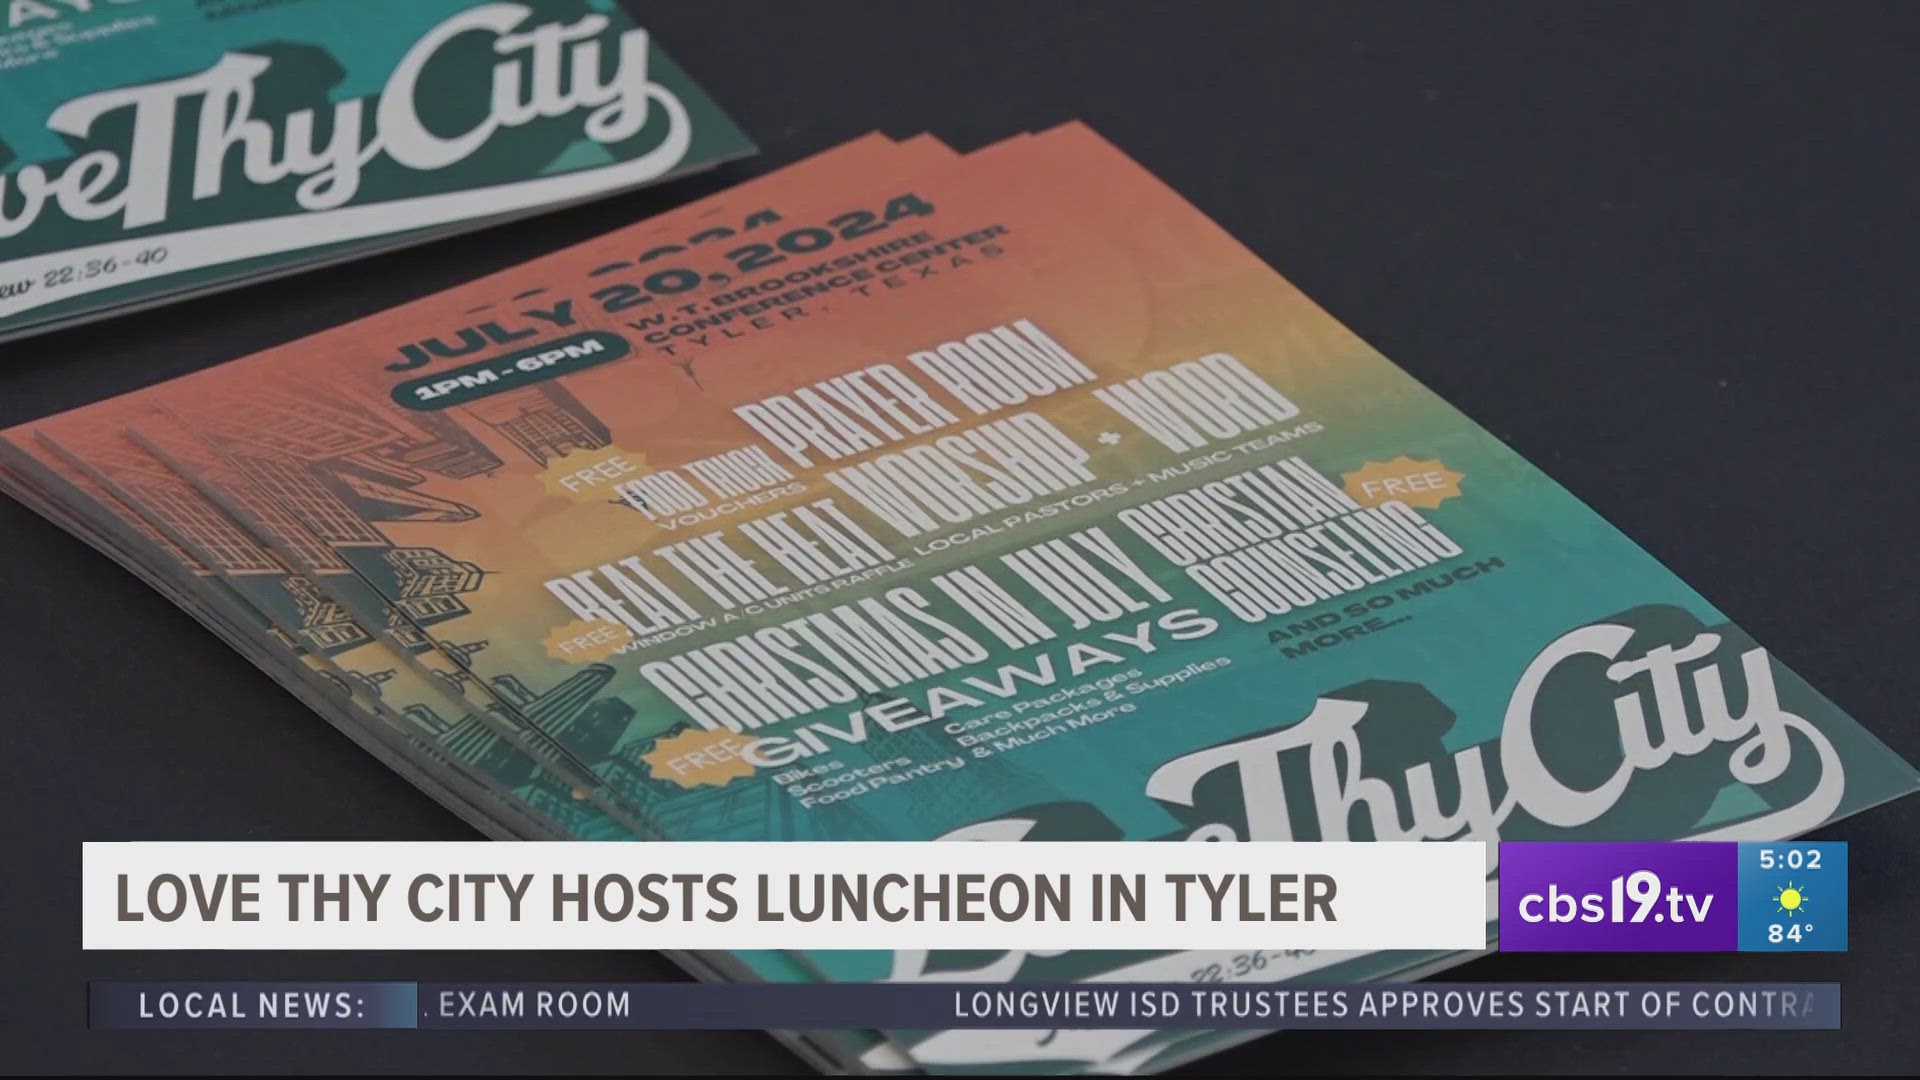 Love Thy City hosts luncheon ahead of summer event with prayer, giveaways